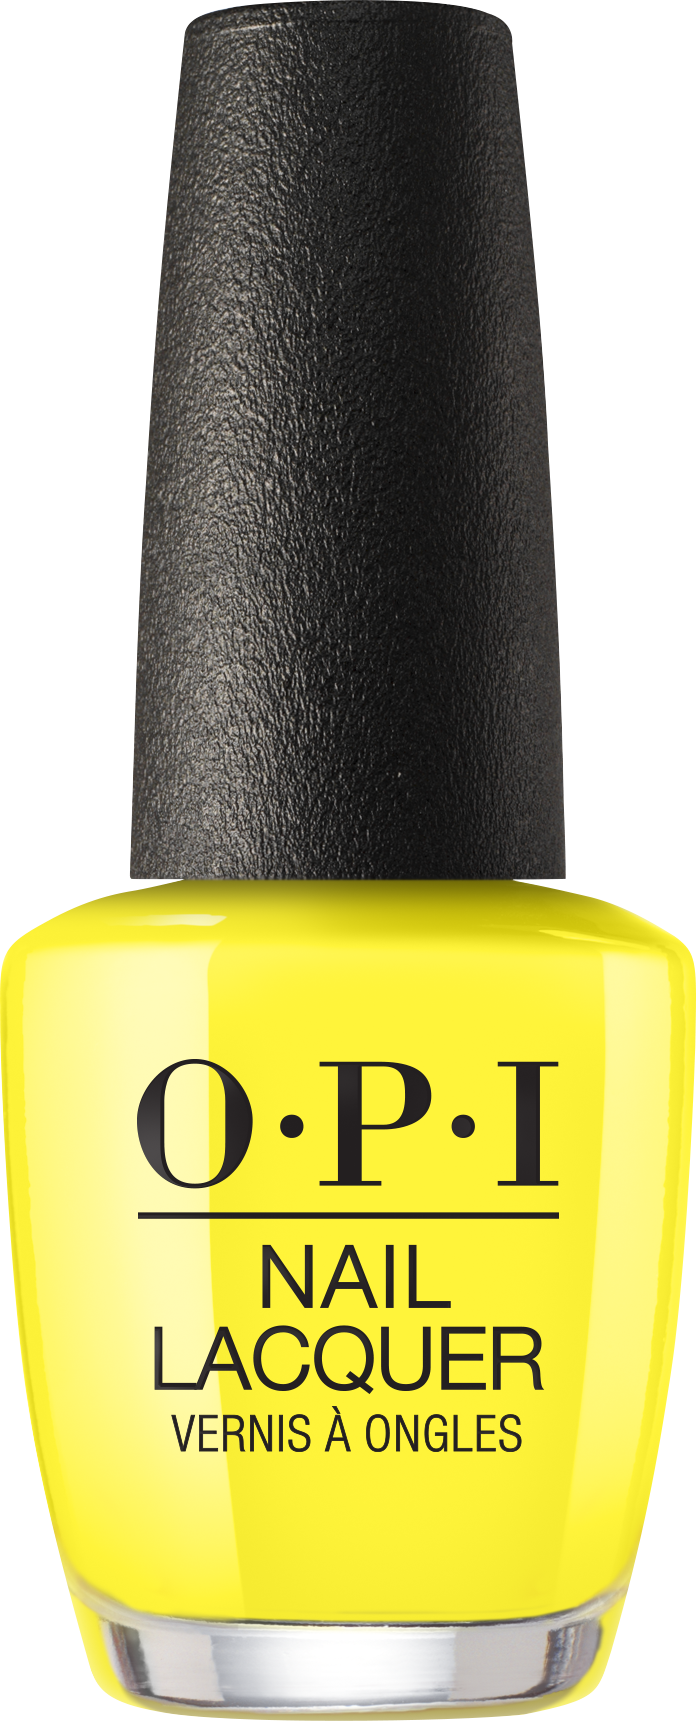 OPI PUMP Up the Volume